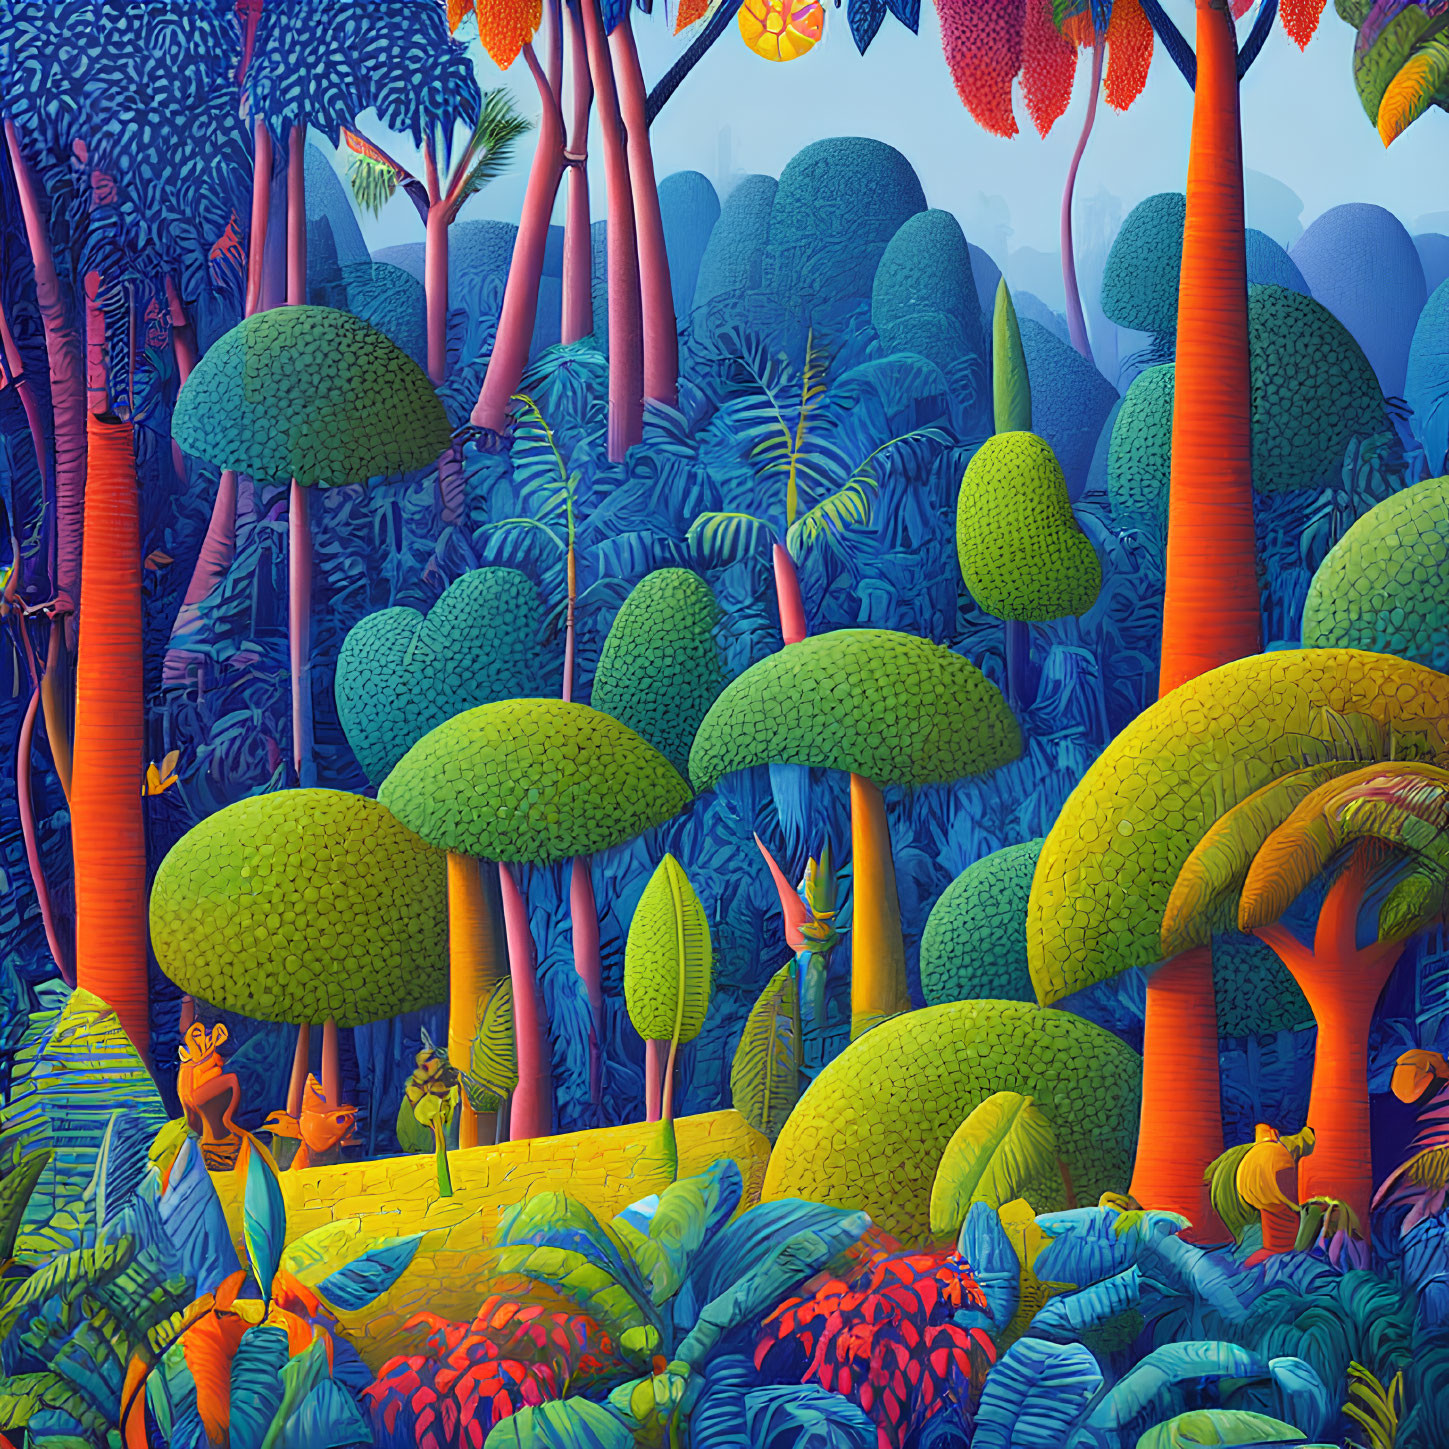 Colorful Stylized Forest with Blue and Orange Trees and Assorted Foliage